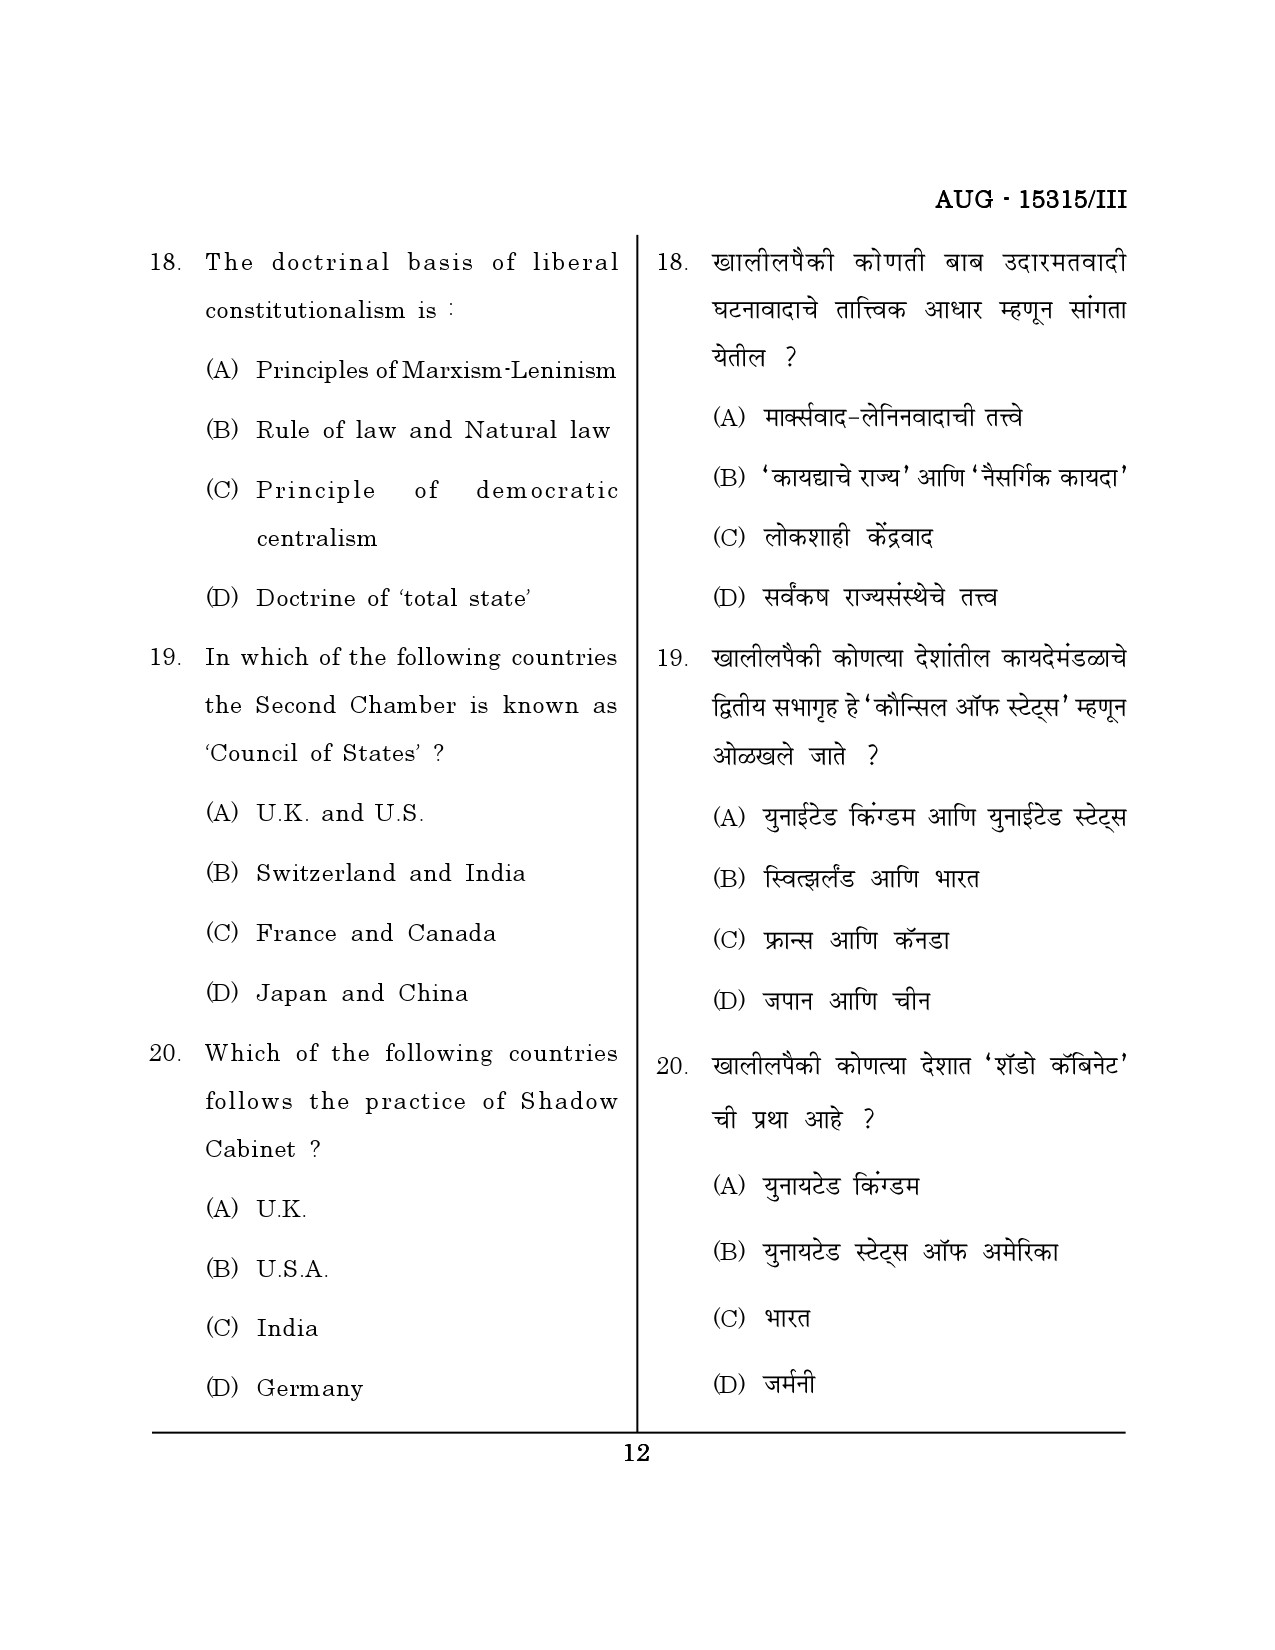 Maharashtra SET Political Science Question Paper III August 2015 11